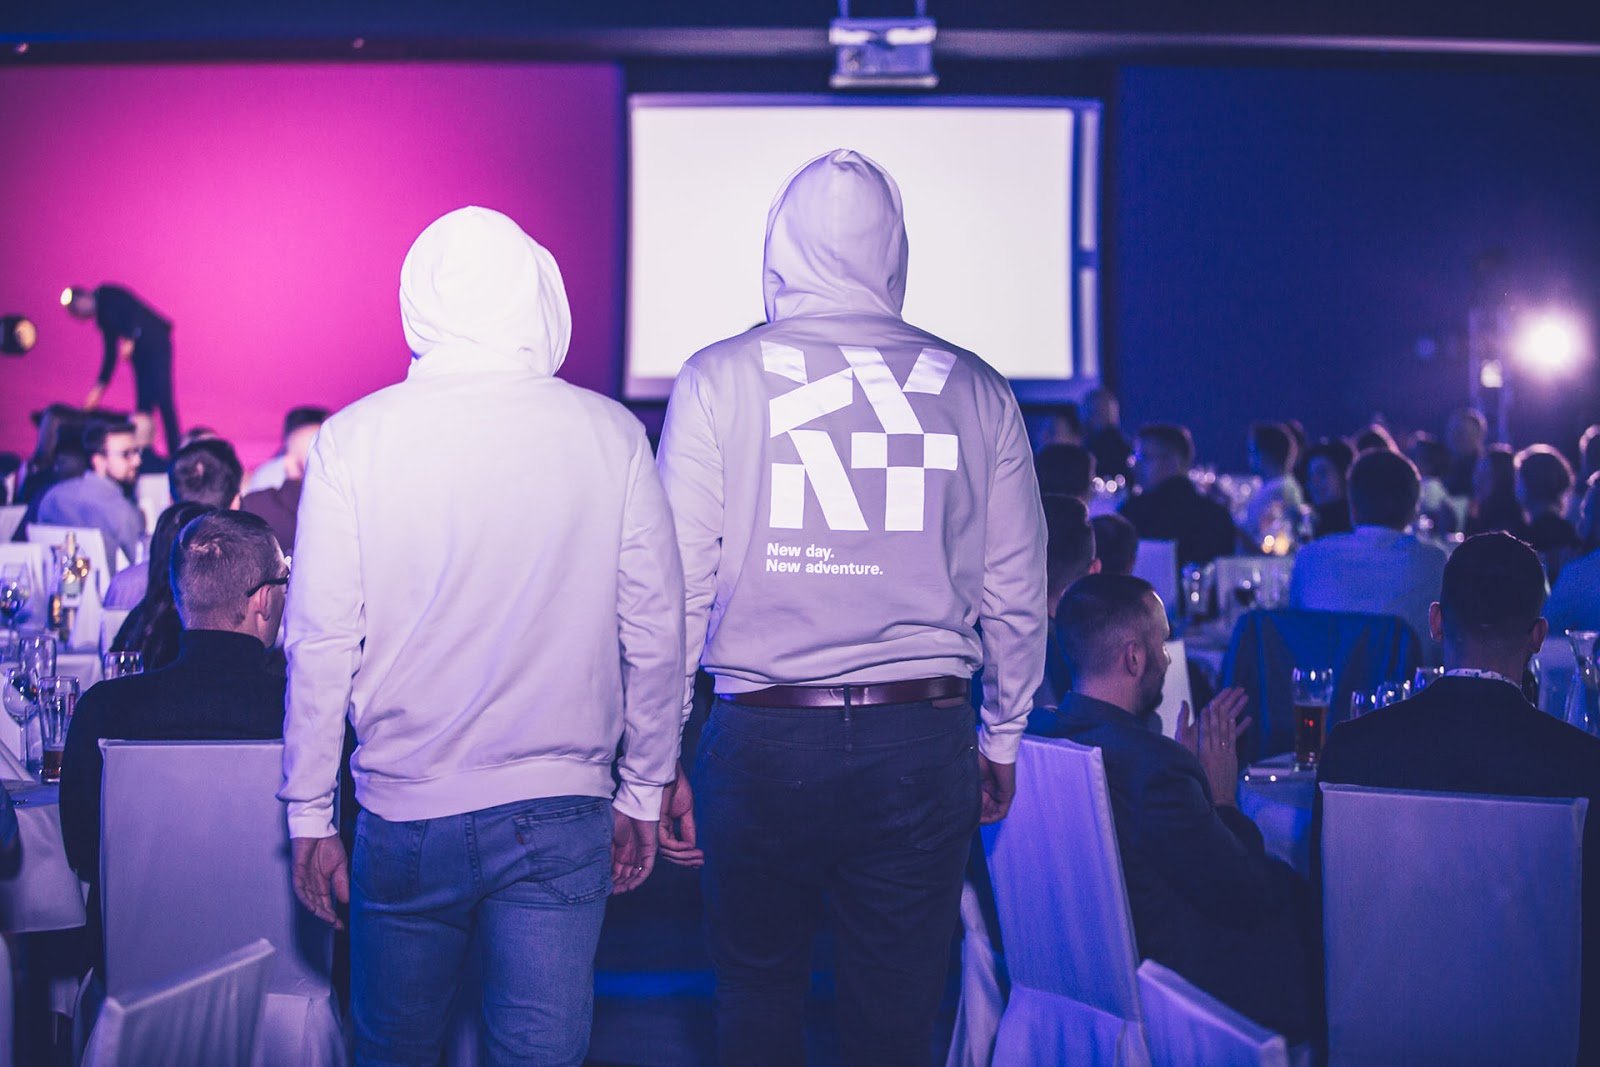 The speakers entering the stage had a special hoodies with the new Divante logo reflecting in the dark, photo: Sławek Przerwa